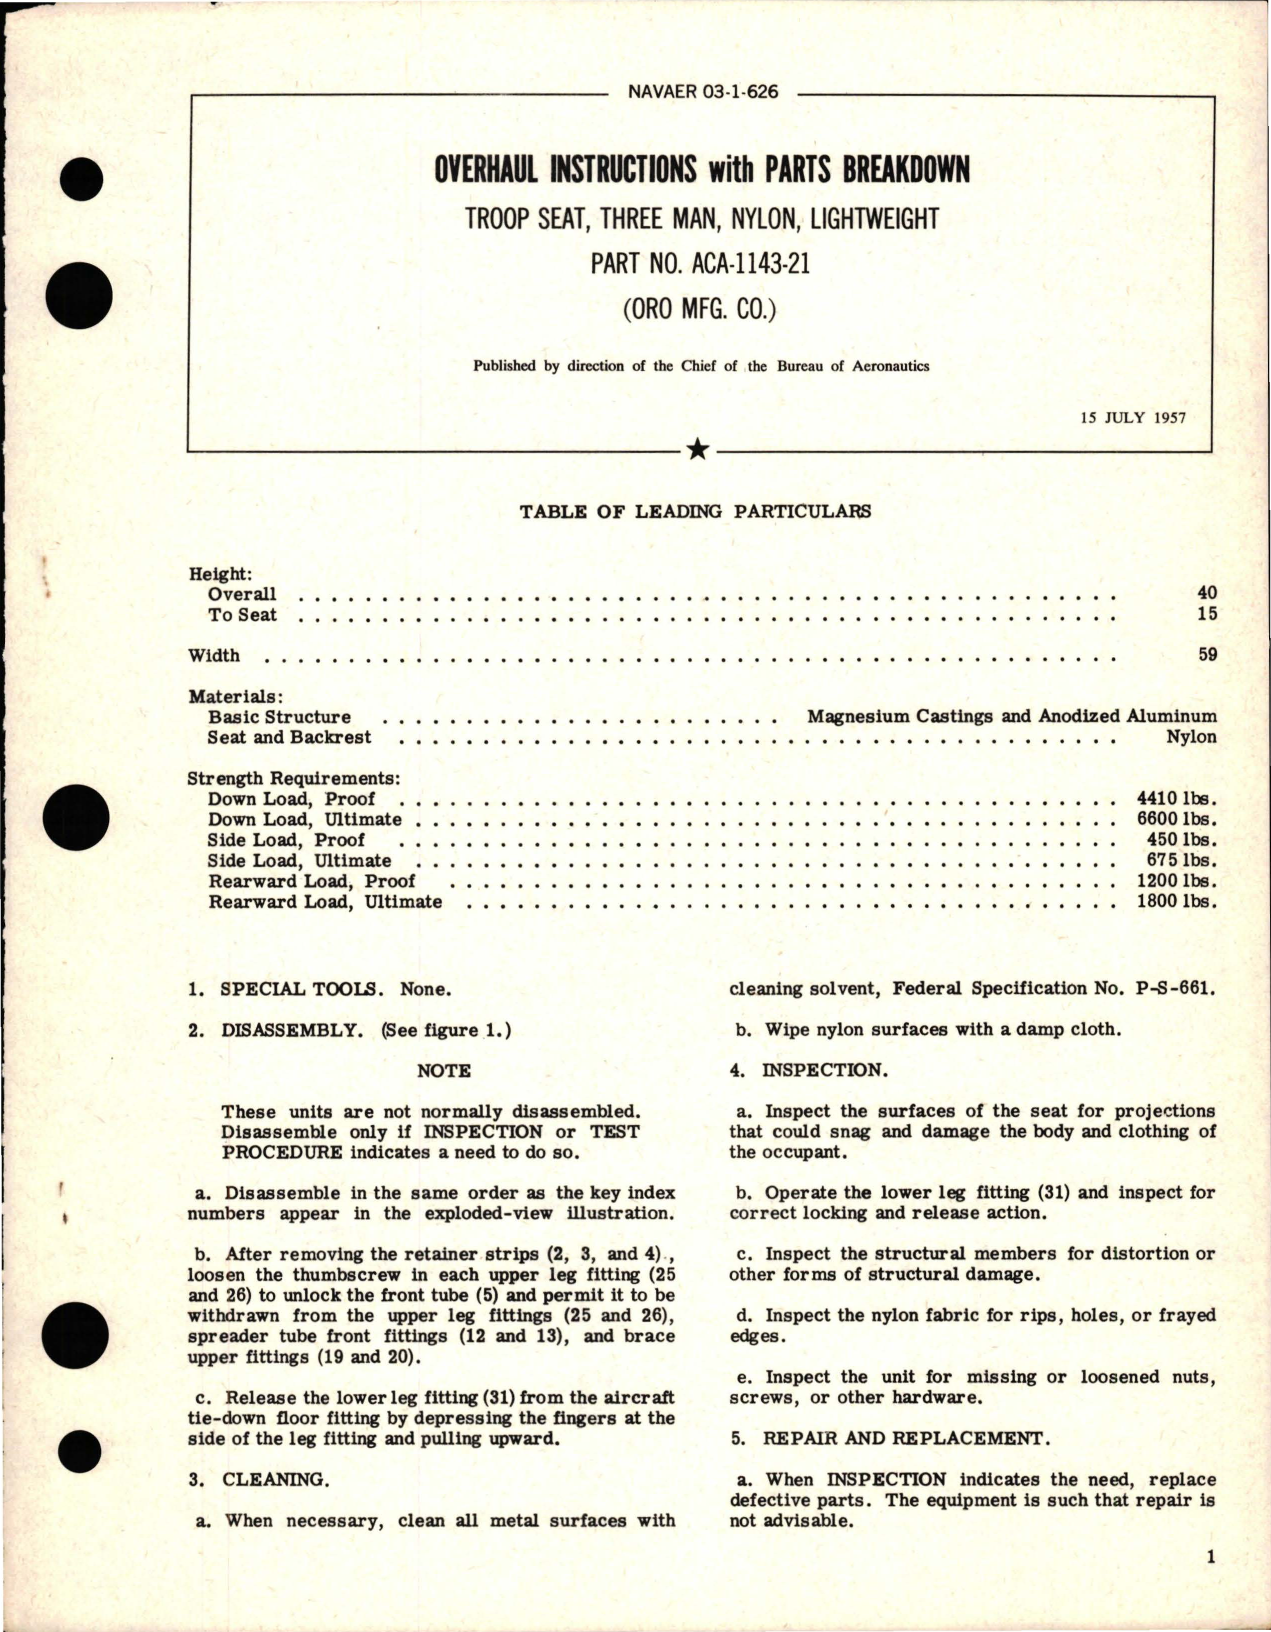 Sample page 1 from AirCorps Library document: Overhaul Instructions with Parts Breakdown for Lightweight, Nylon, Three Man Troop Seat - Part ACA-1143-21